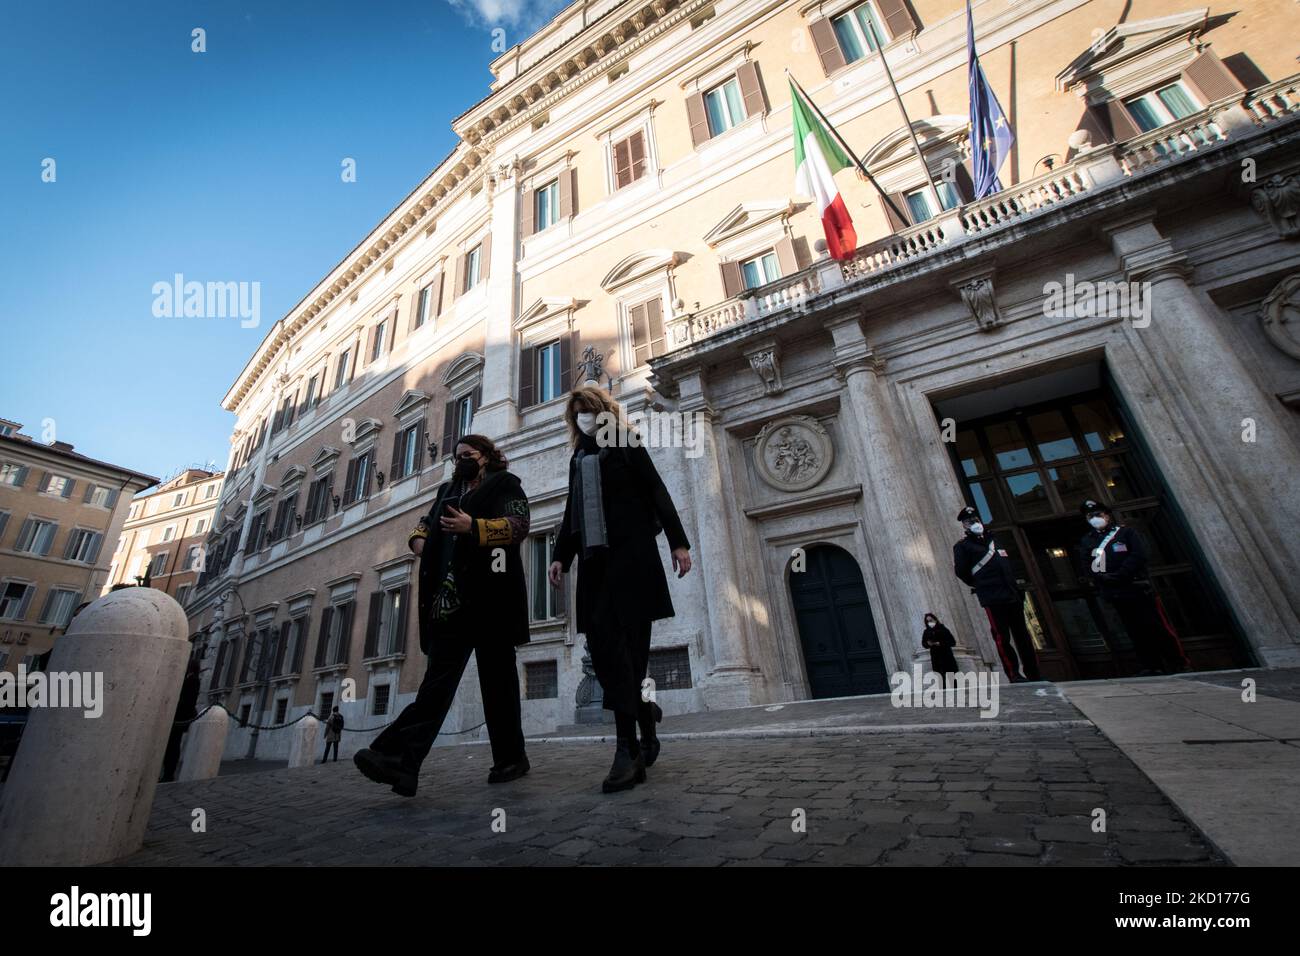 Erika Stefani Minister for Disabilities of the Italian Republic on January 24, 2022 in Rome, Italy. The Italian parliament will convene on January 24 to begin voting for a new head of state to replace the outgoing Sergio Mattarella. (Photo by Andrea Ronchini/NurPhoto) Stock Photo